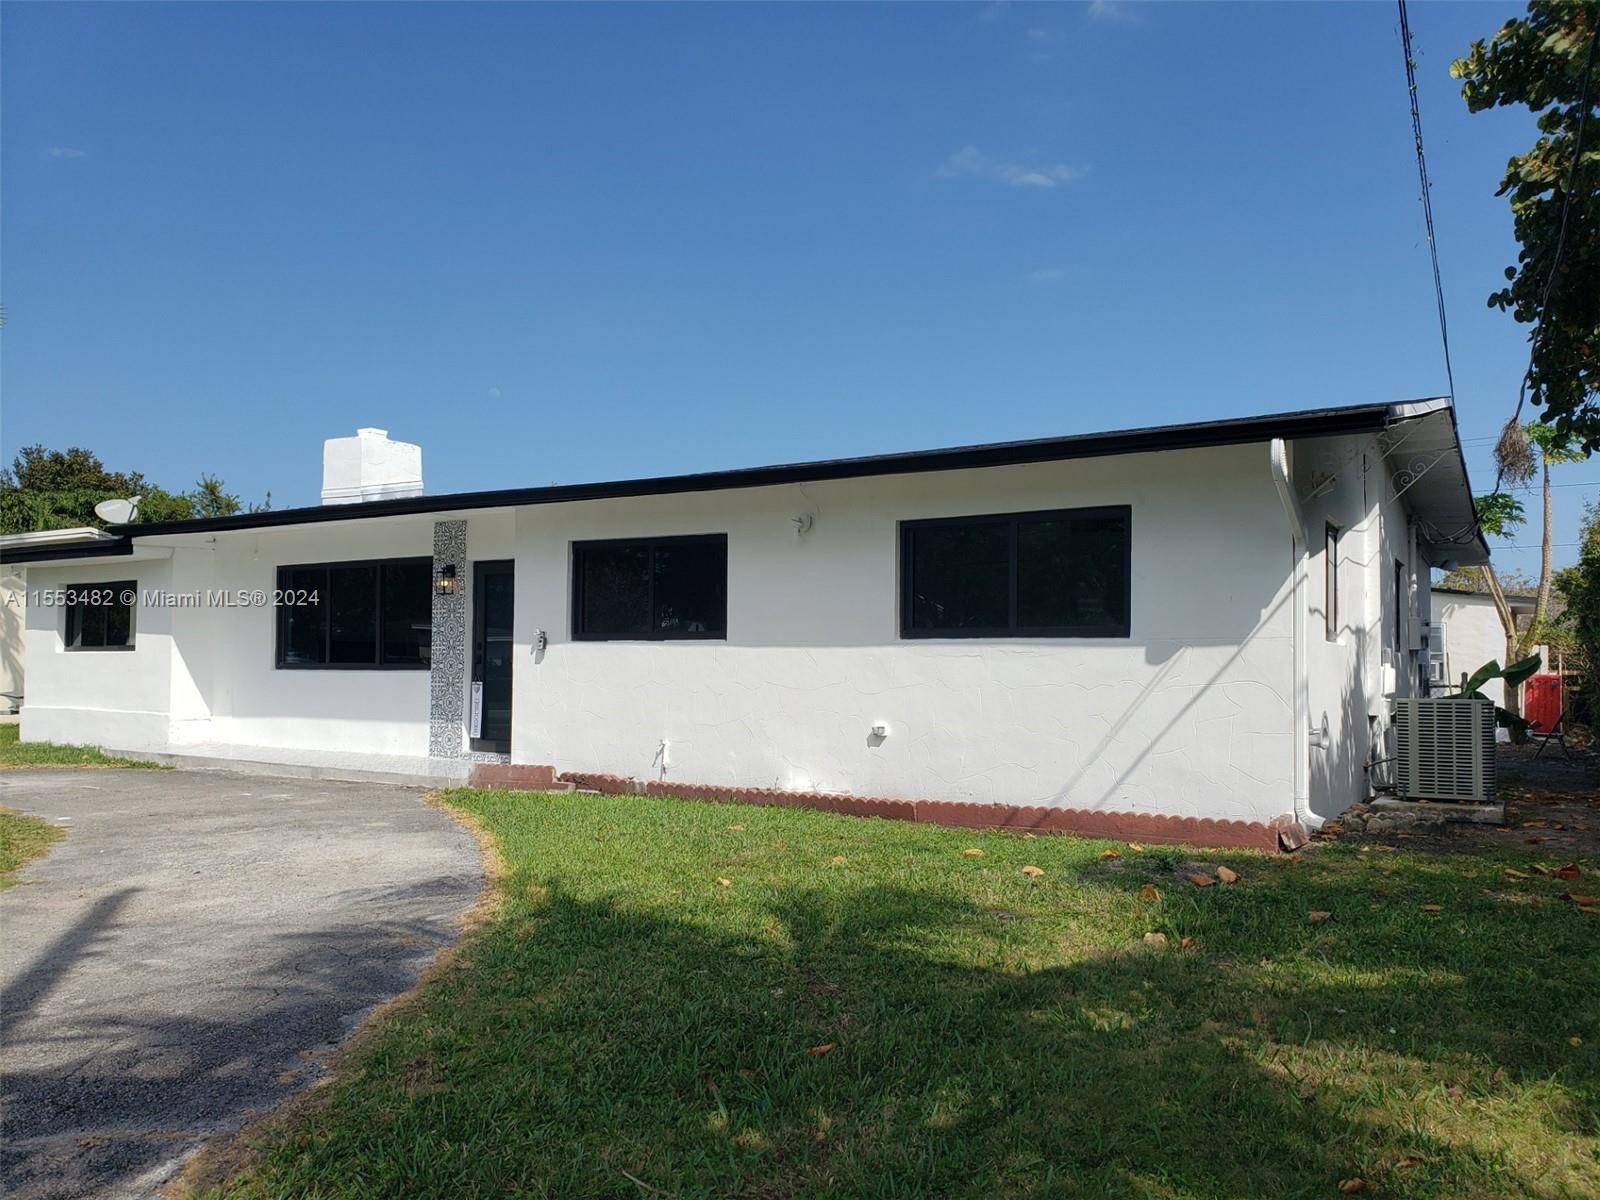 Excellent Opportunity in a Great Very Prestigious Location developing in excellent Growth In the South Florida Area, close to Prestigious Shops and Restaurants.